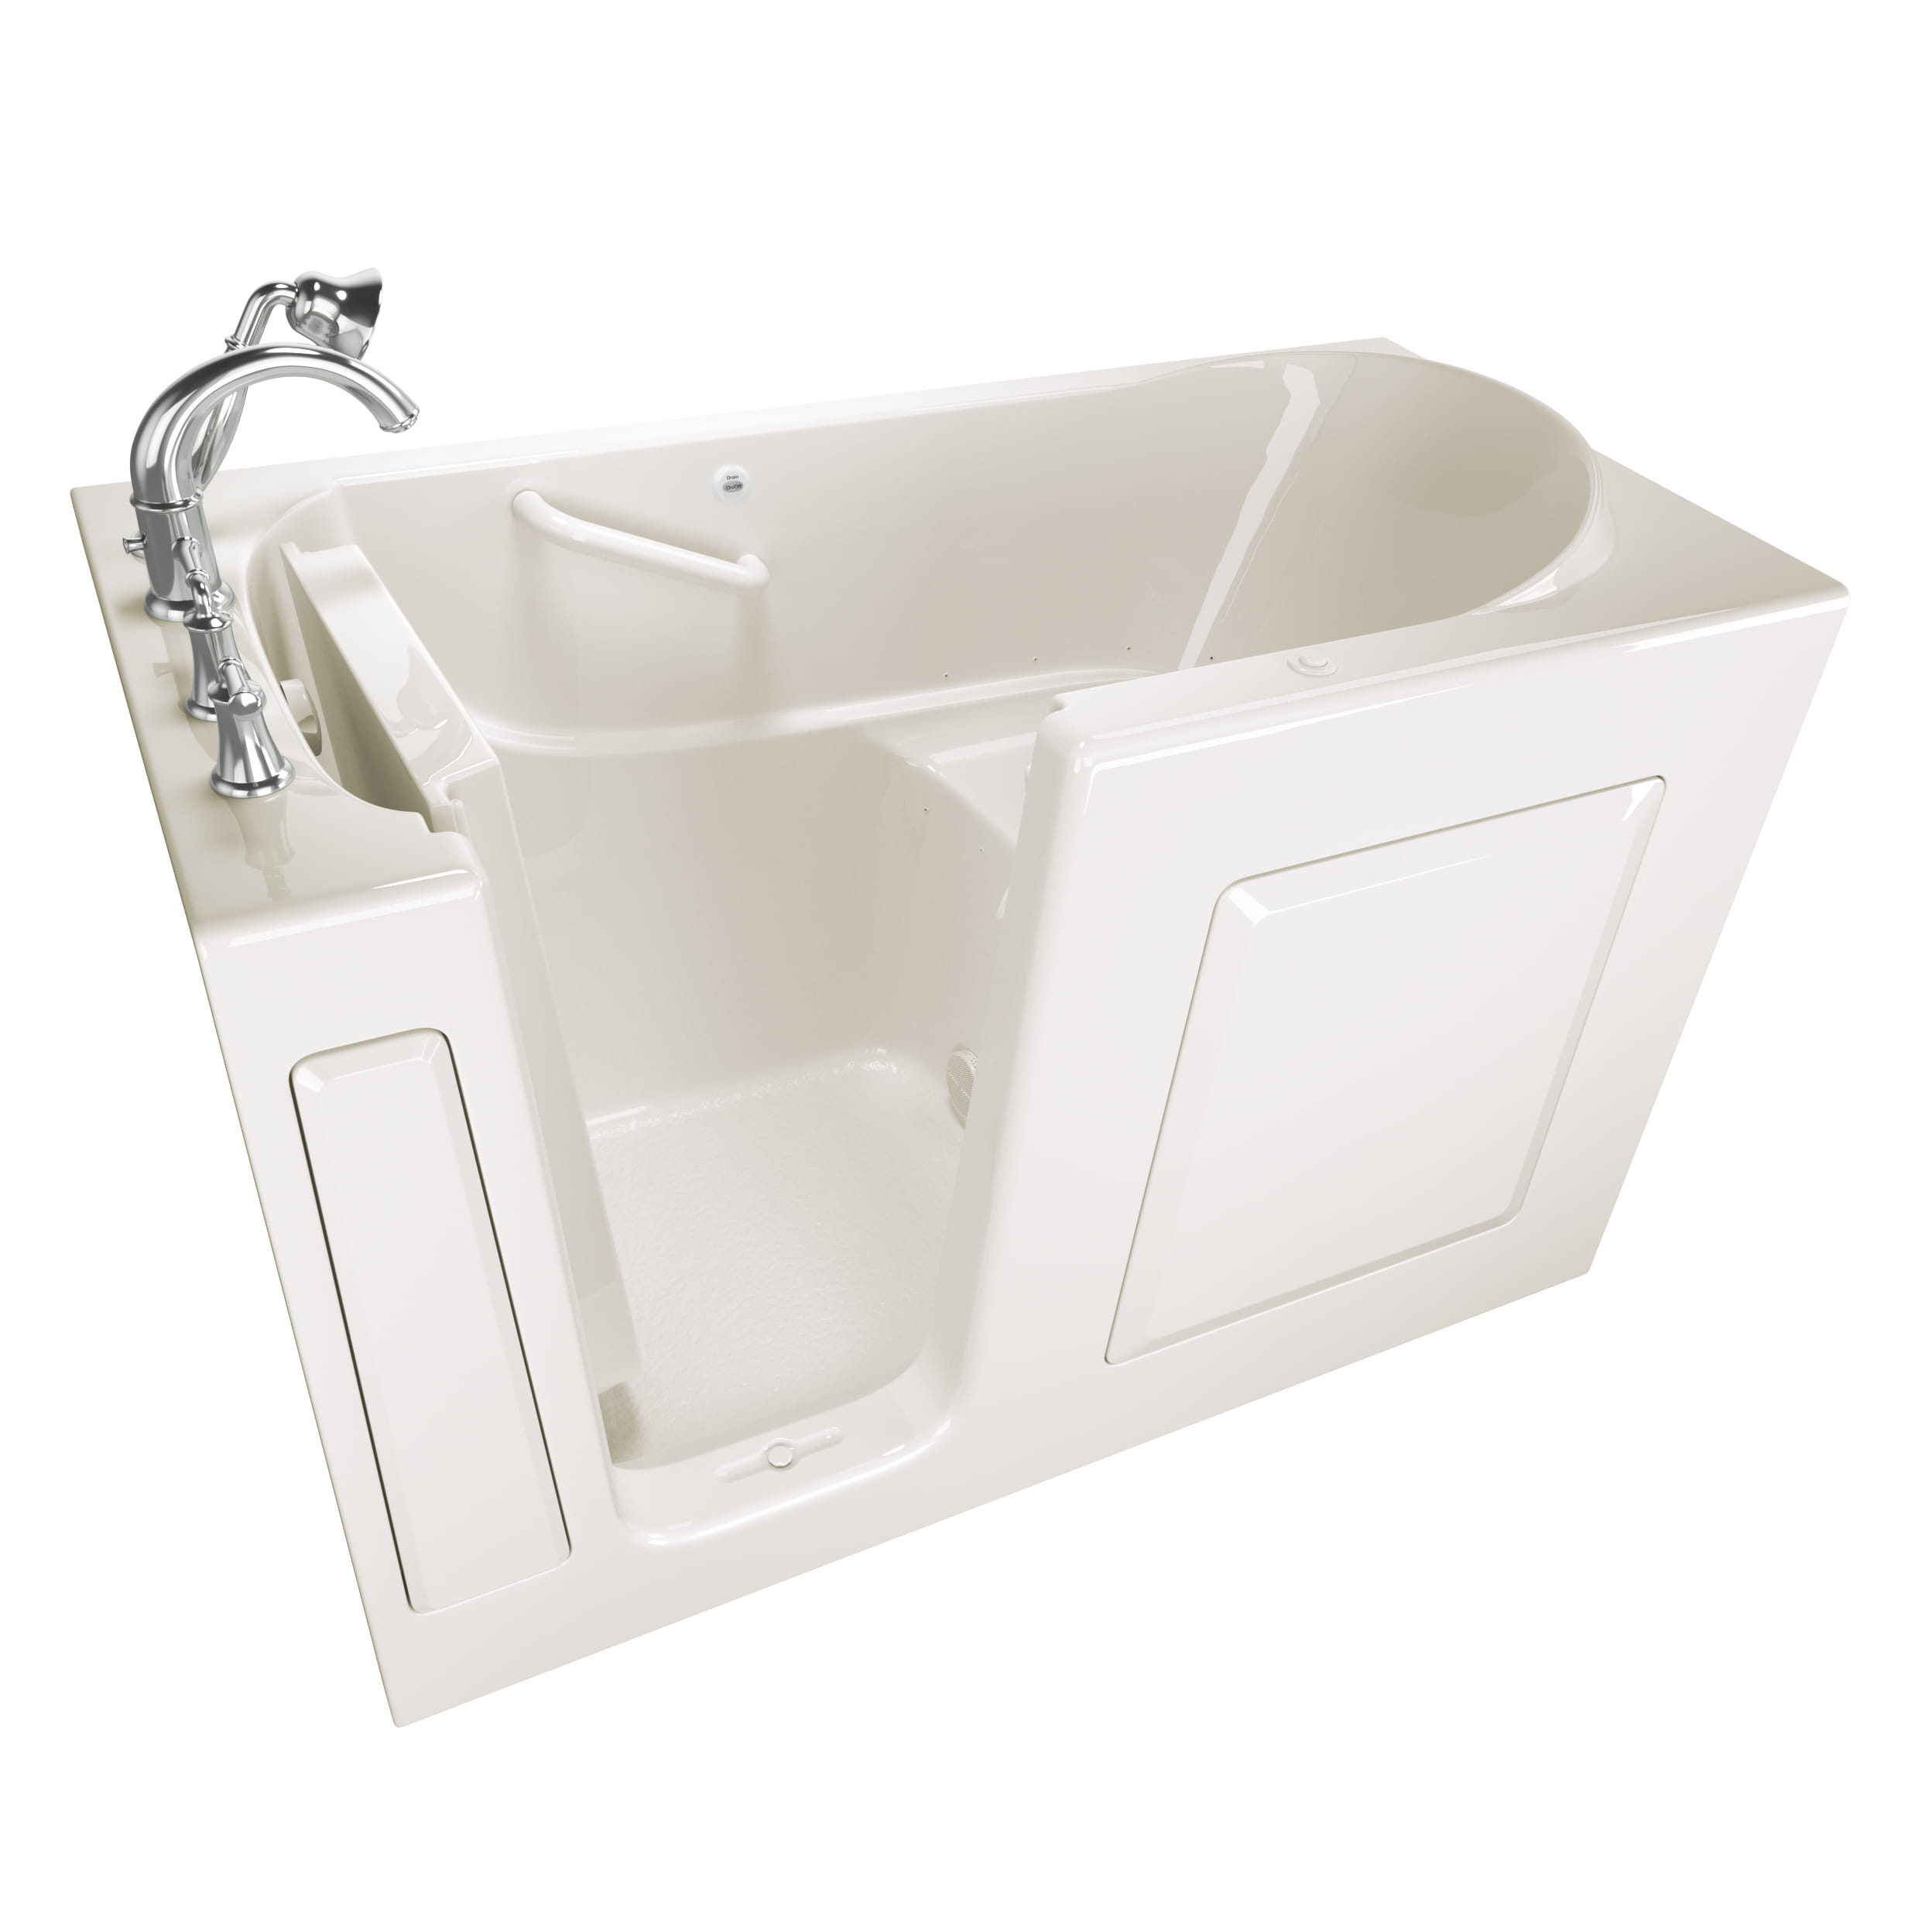 Gelcoat Value Series 30 x 60  Inch Walk in Tub With Air Spa System   Left Hand Drain With Faucet WIB LINEN